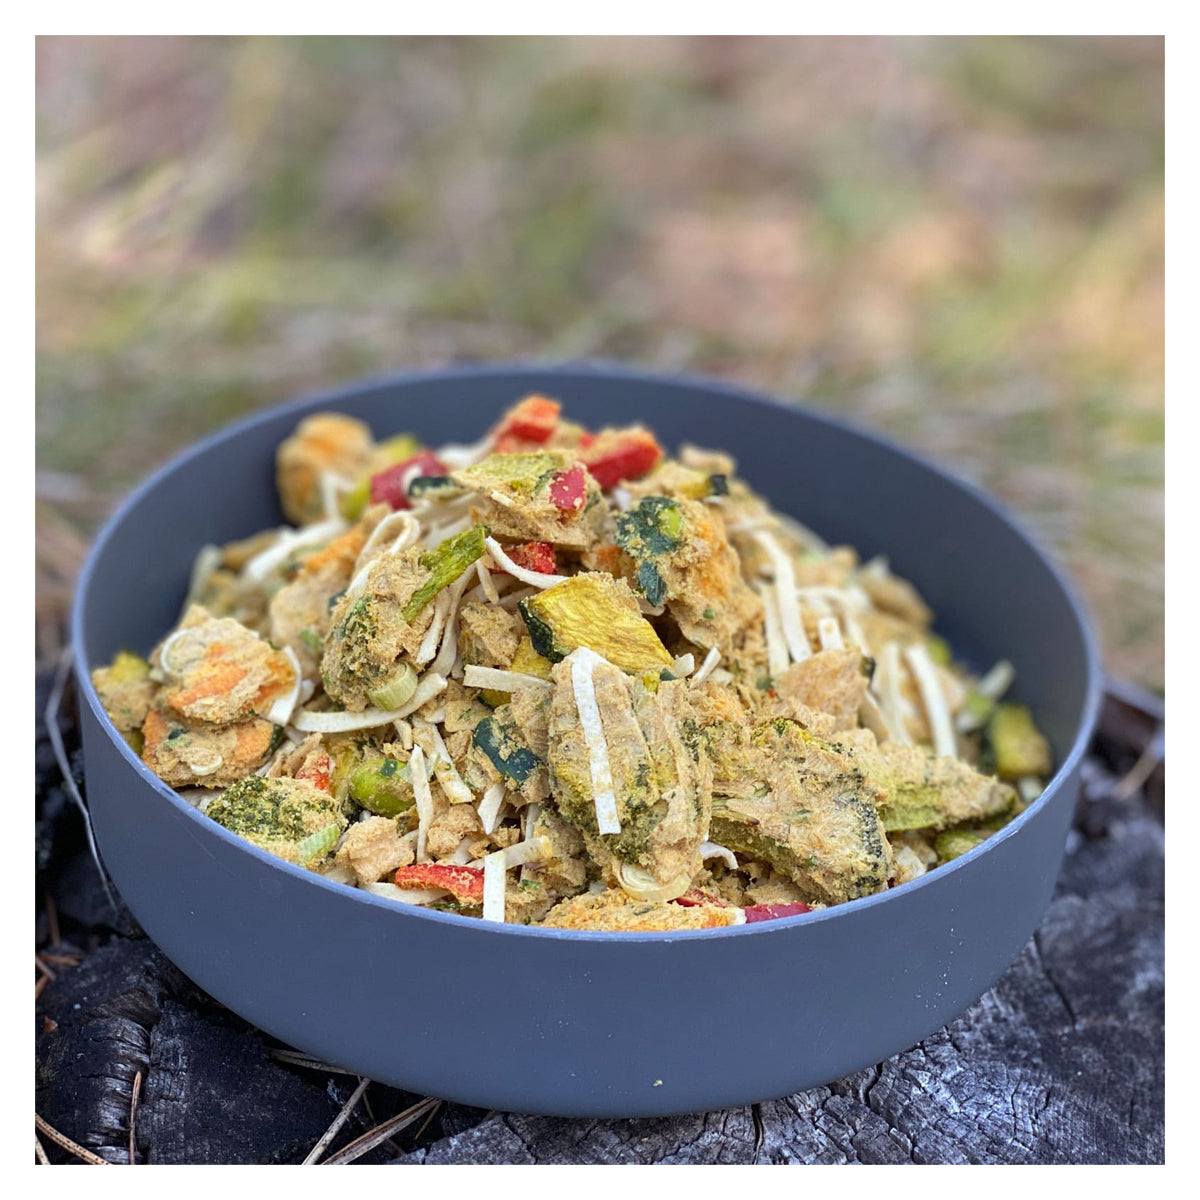 Pinnacle Foods Thai Peanut Curry with Roasted Vegetables and Rice Noodles in  by GOHUNT | Pinnacle Foods - GOHUNT Shop